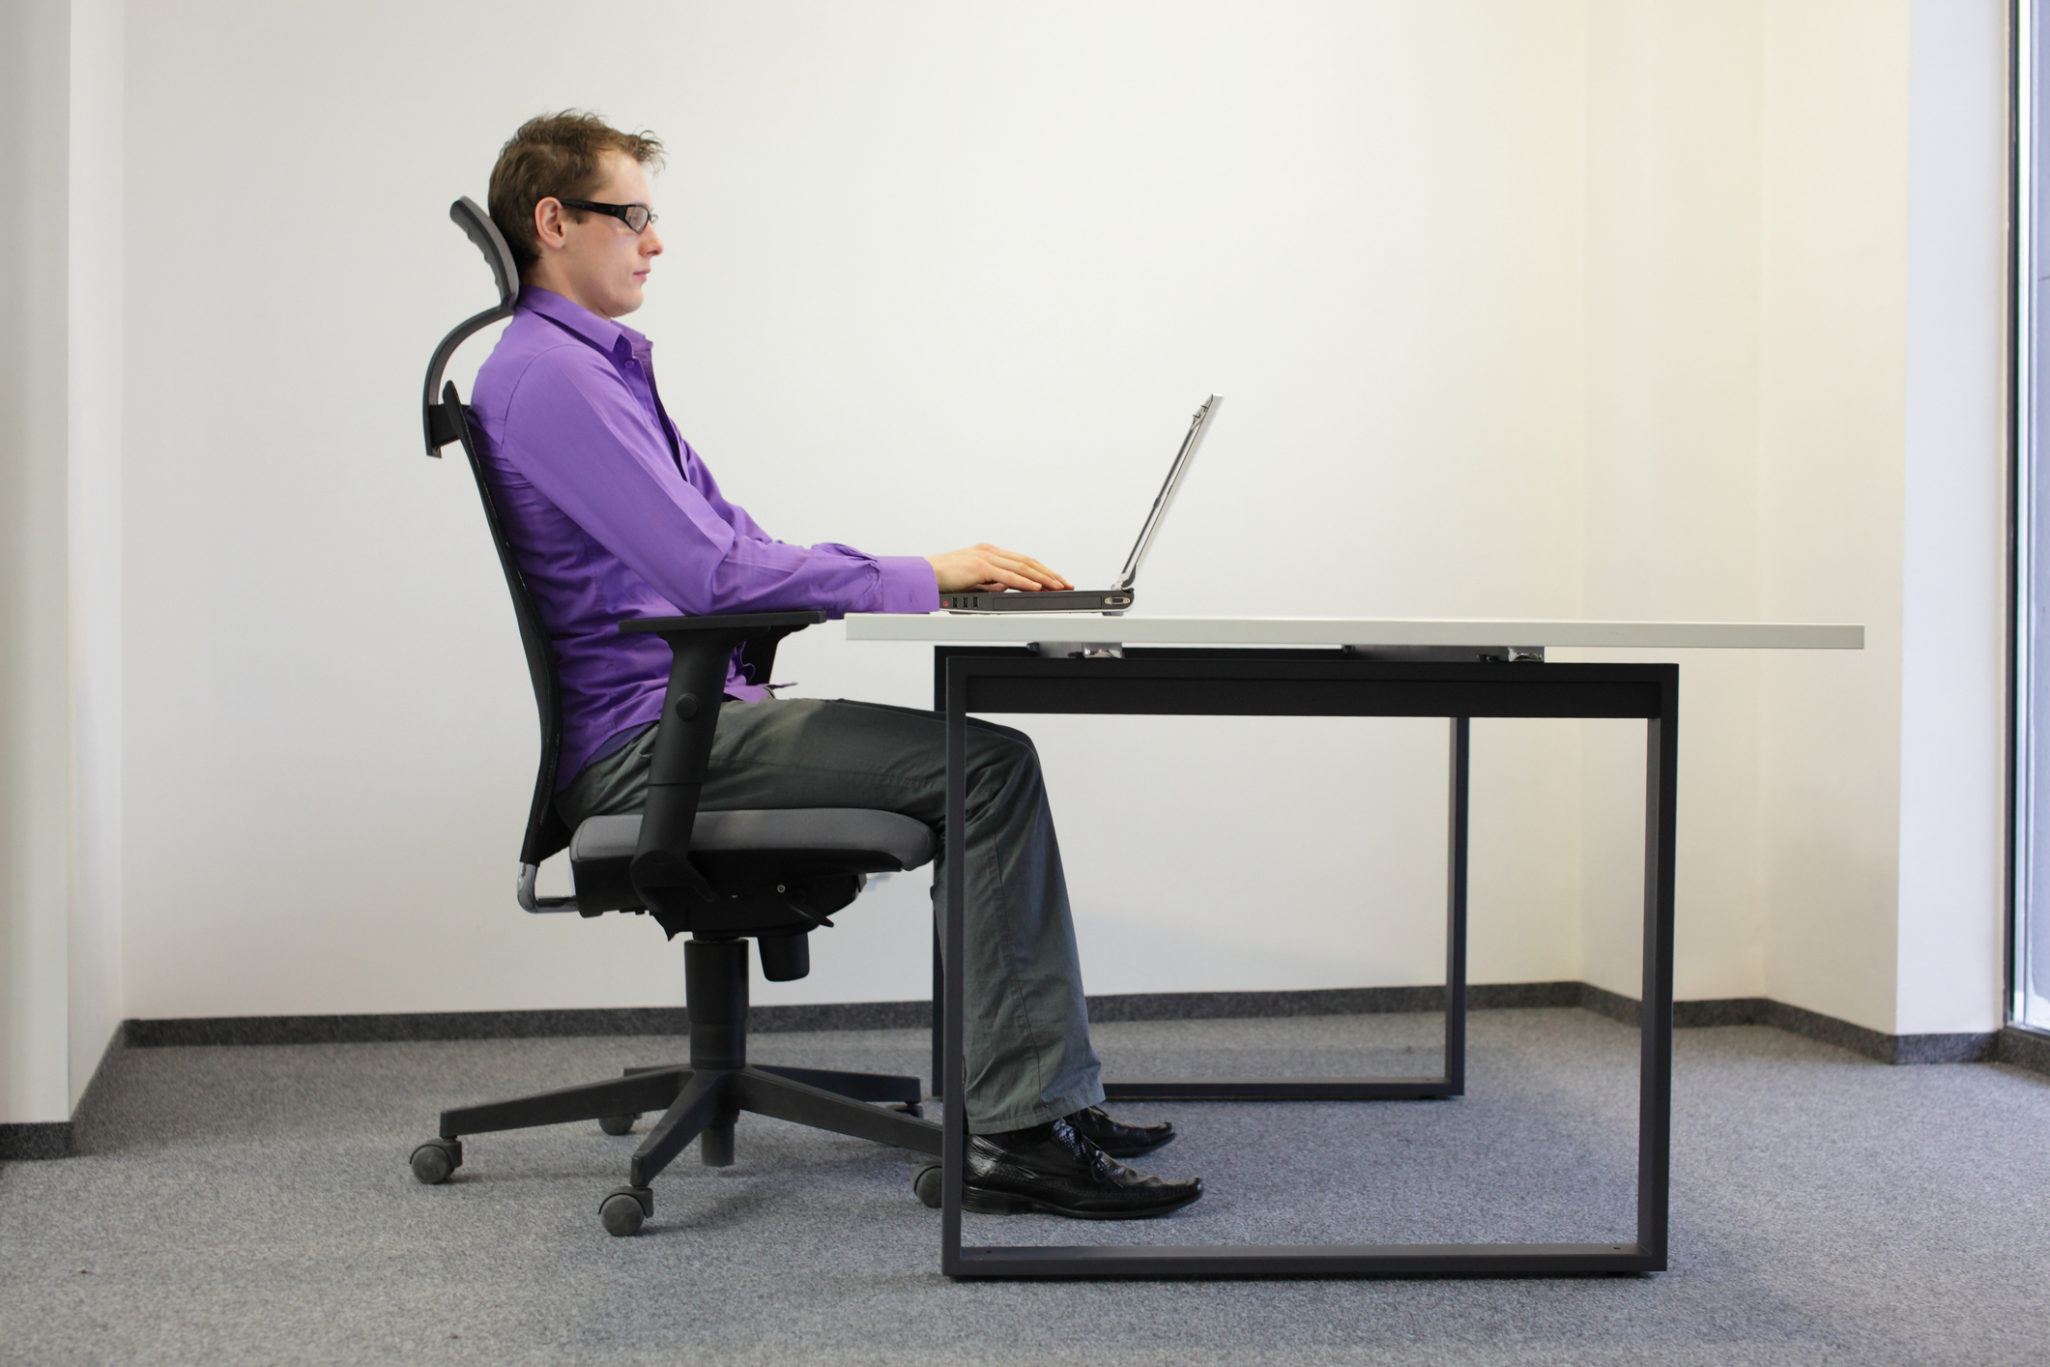 correct sitting position at workstation. man on chair working with laptop